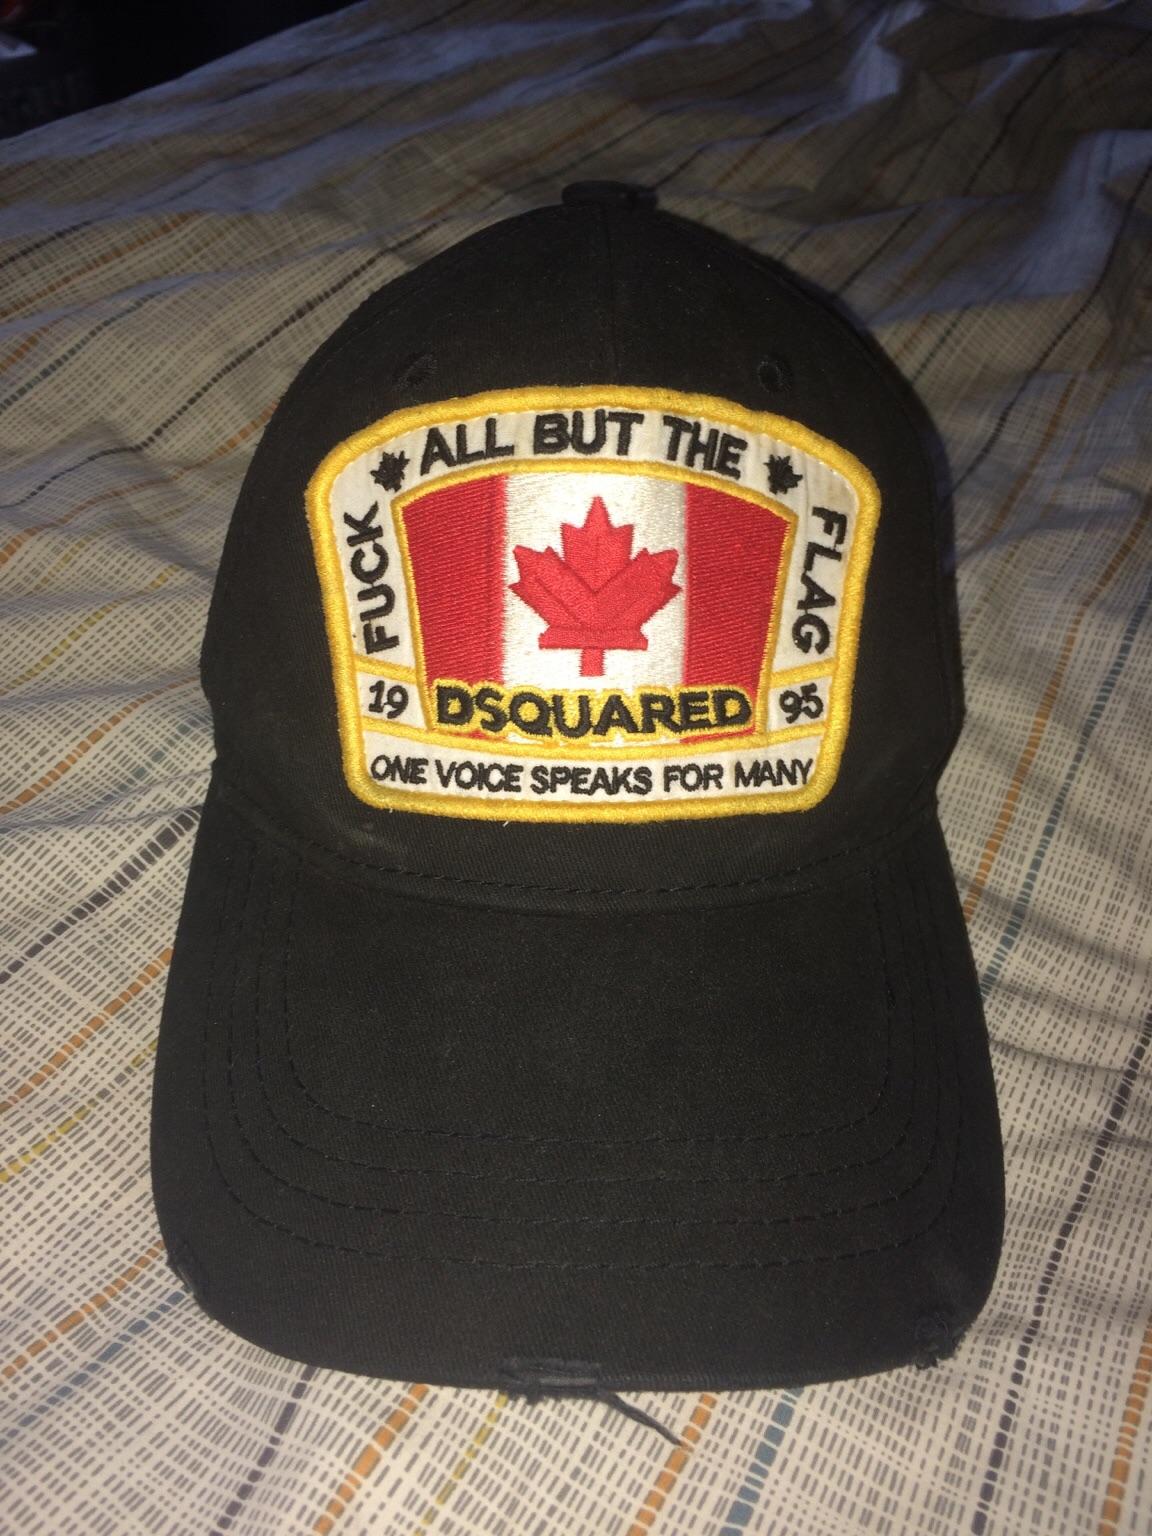 DSquared all but the flag cap in SK8 